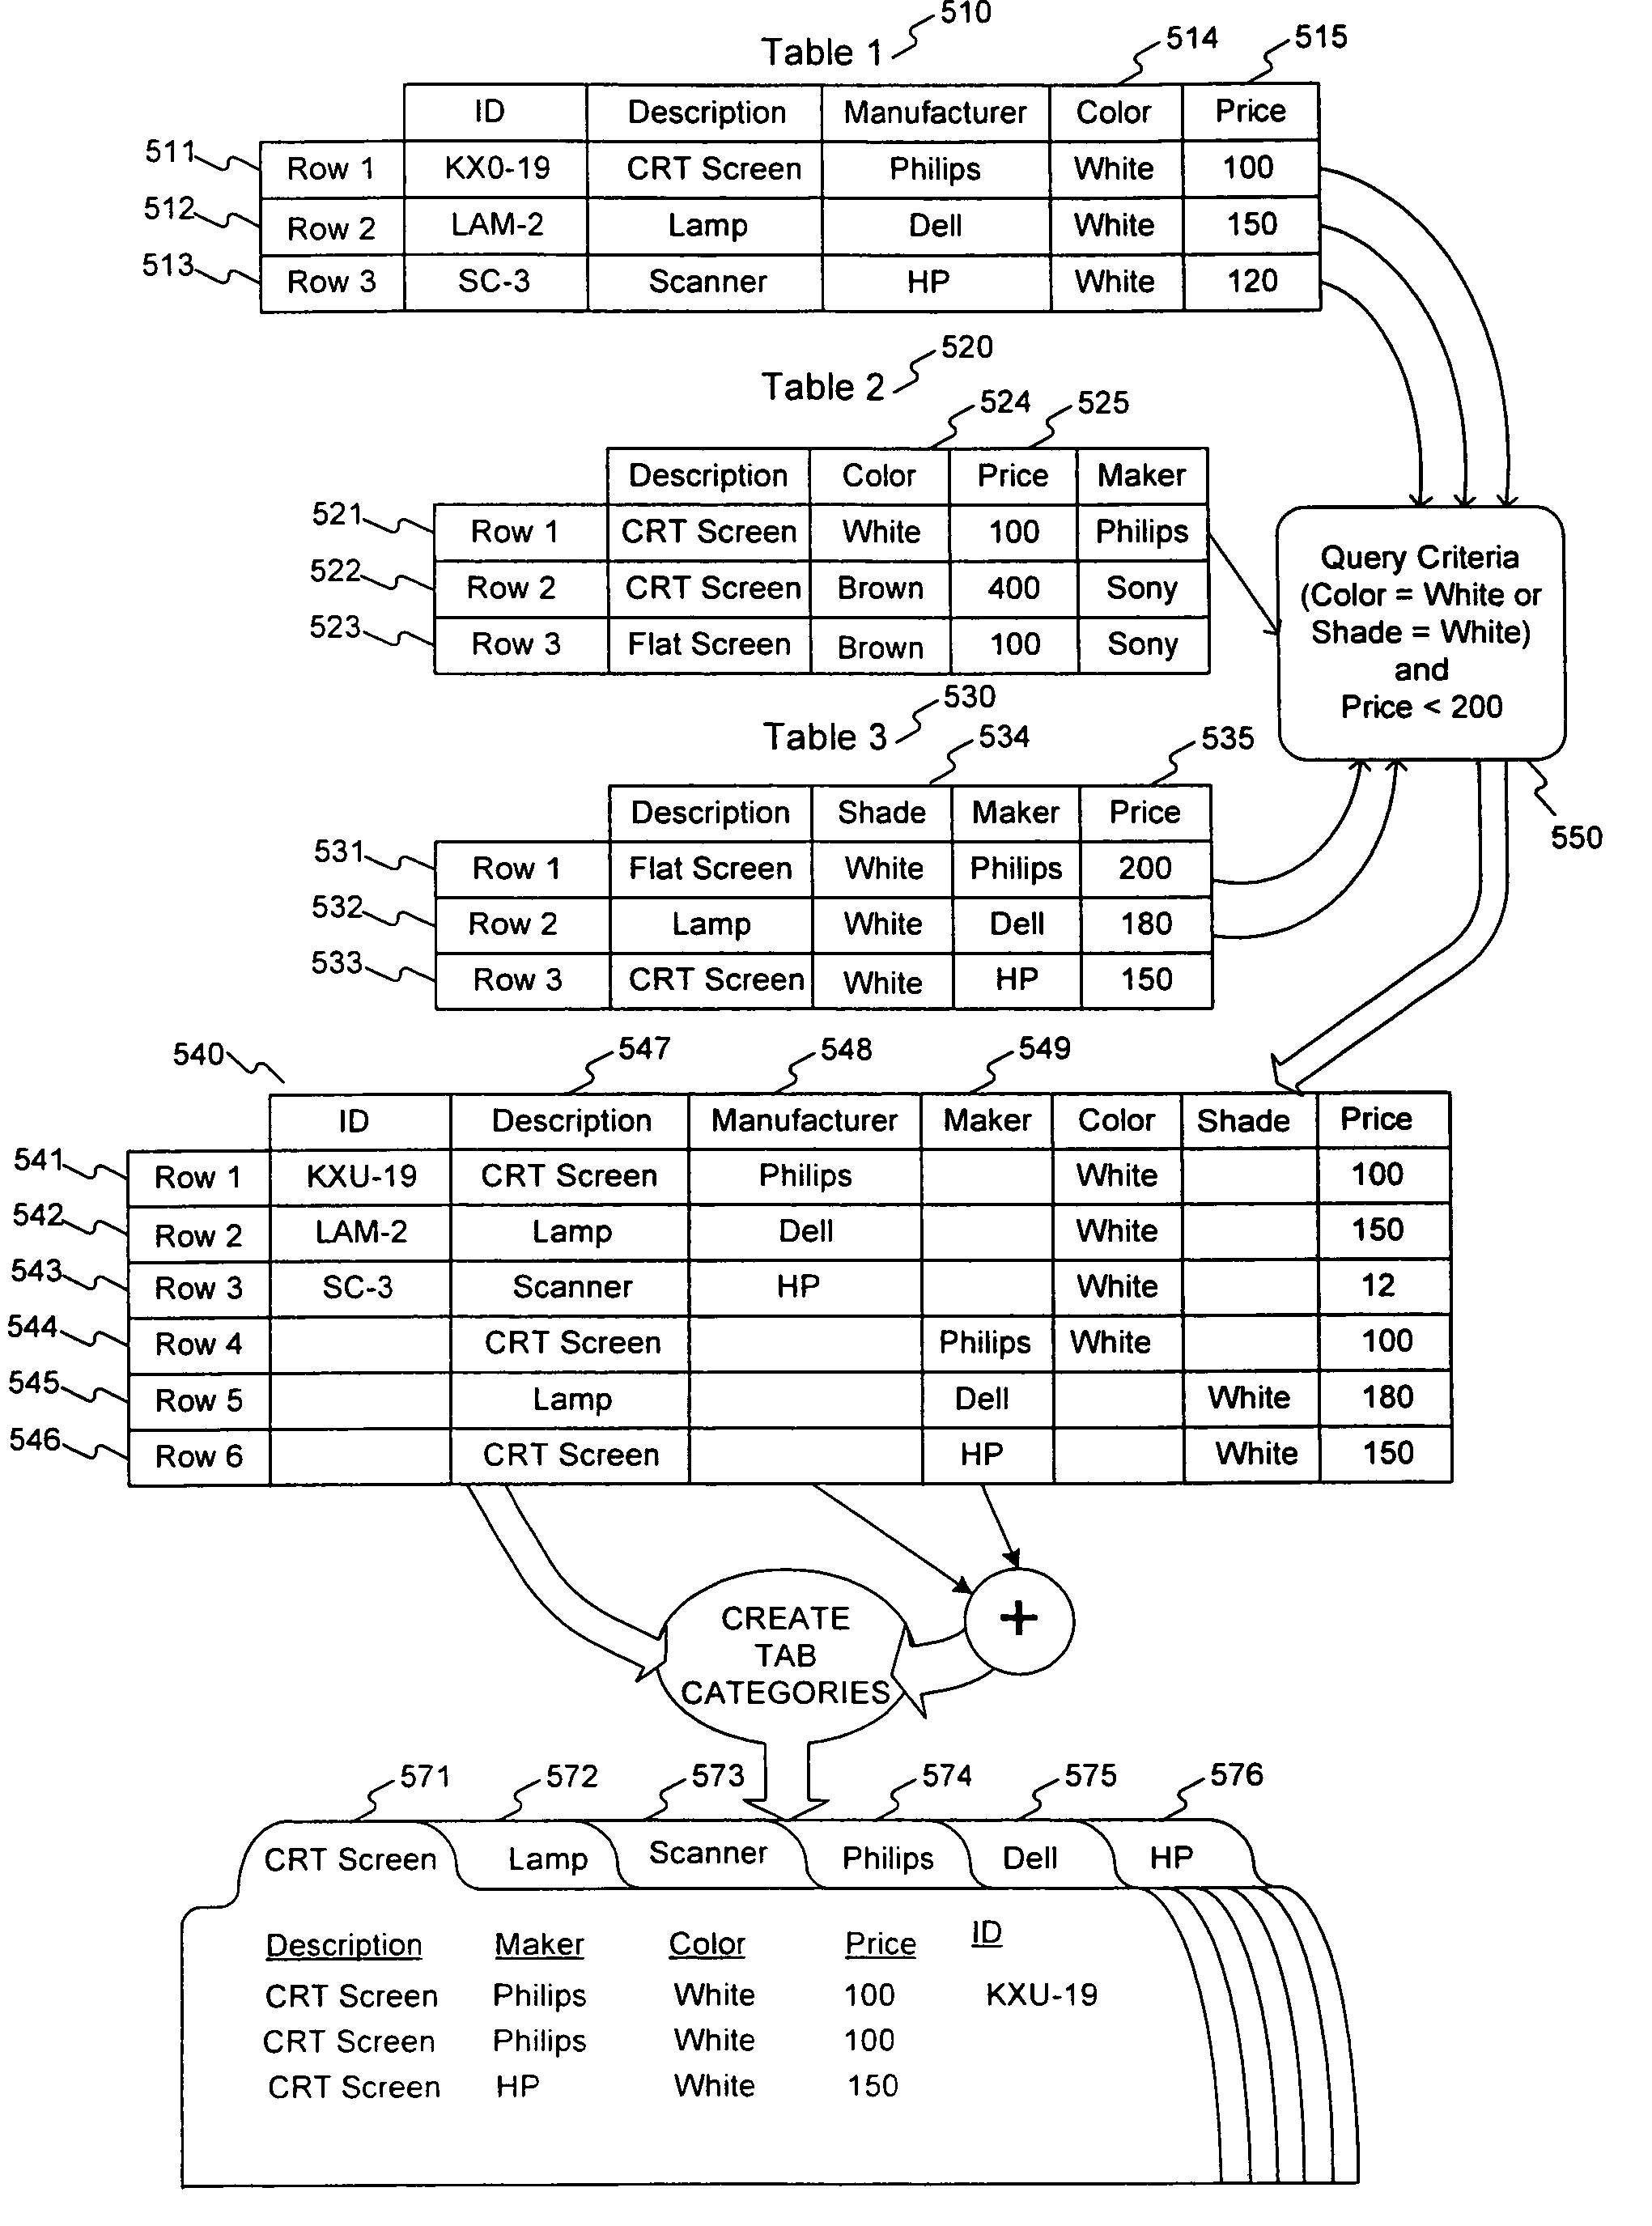 User-friendly search results display system, method, and computer program product